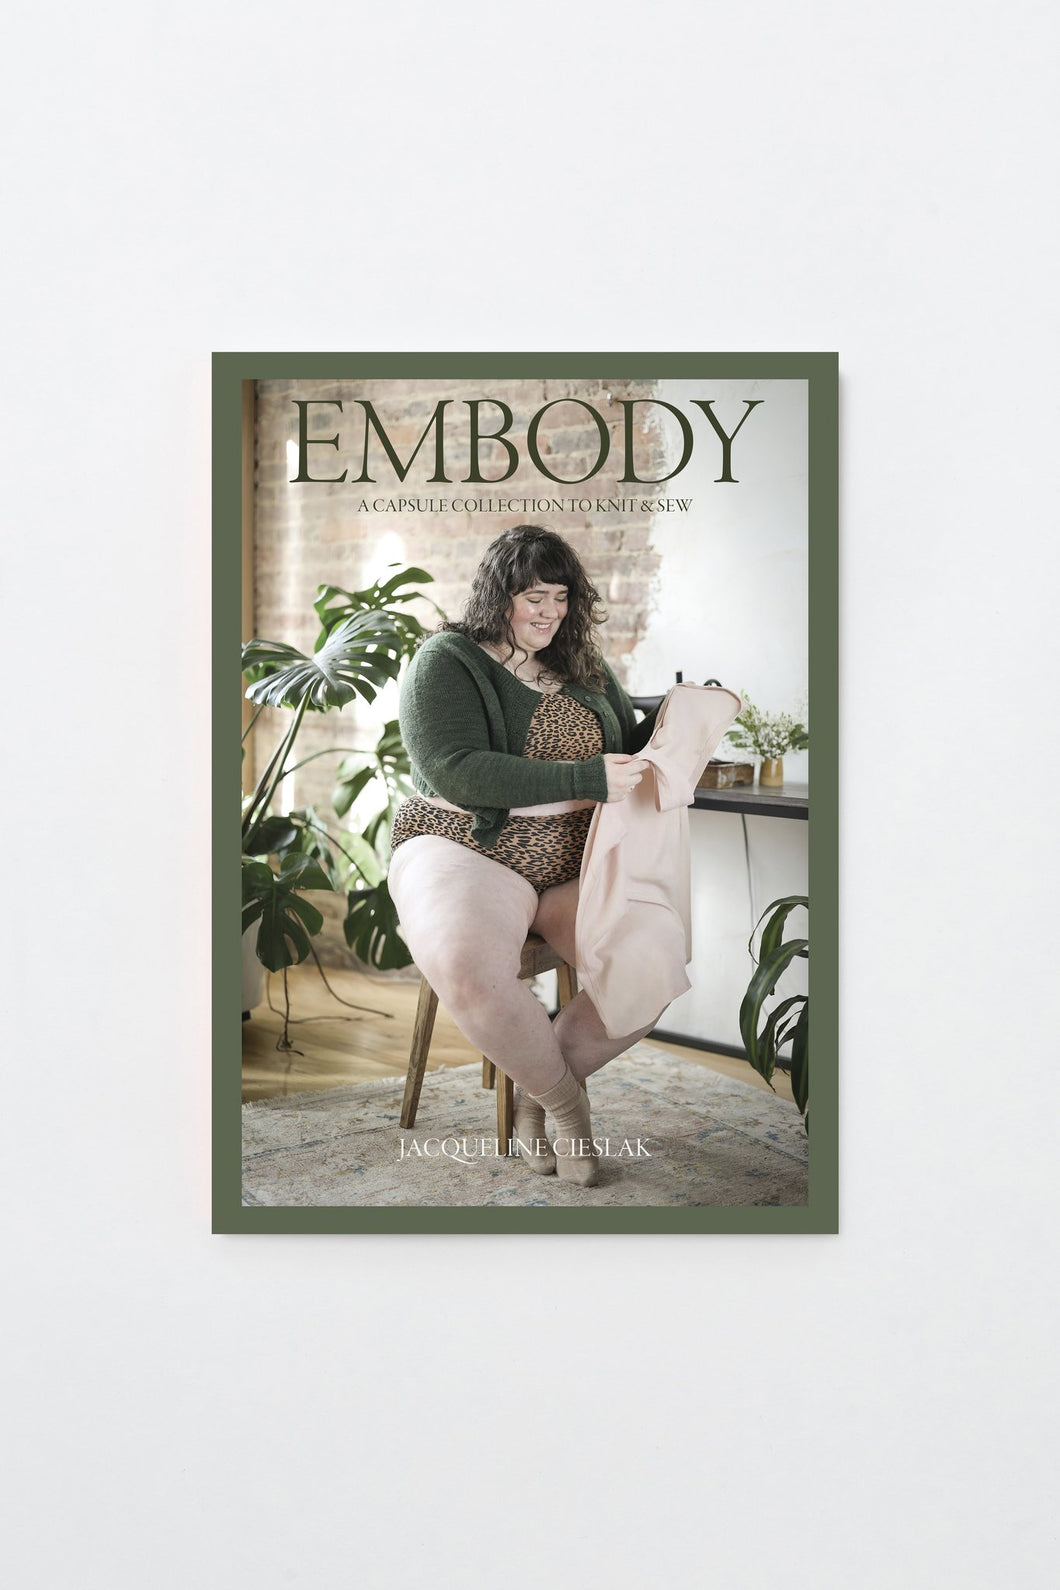 EMBODY - A CAPSULE COLLECTION TO KNIT & SEW BY JACQUELINE CIESLAK